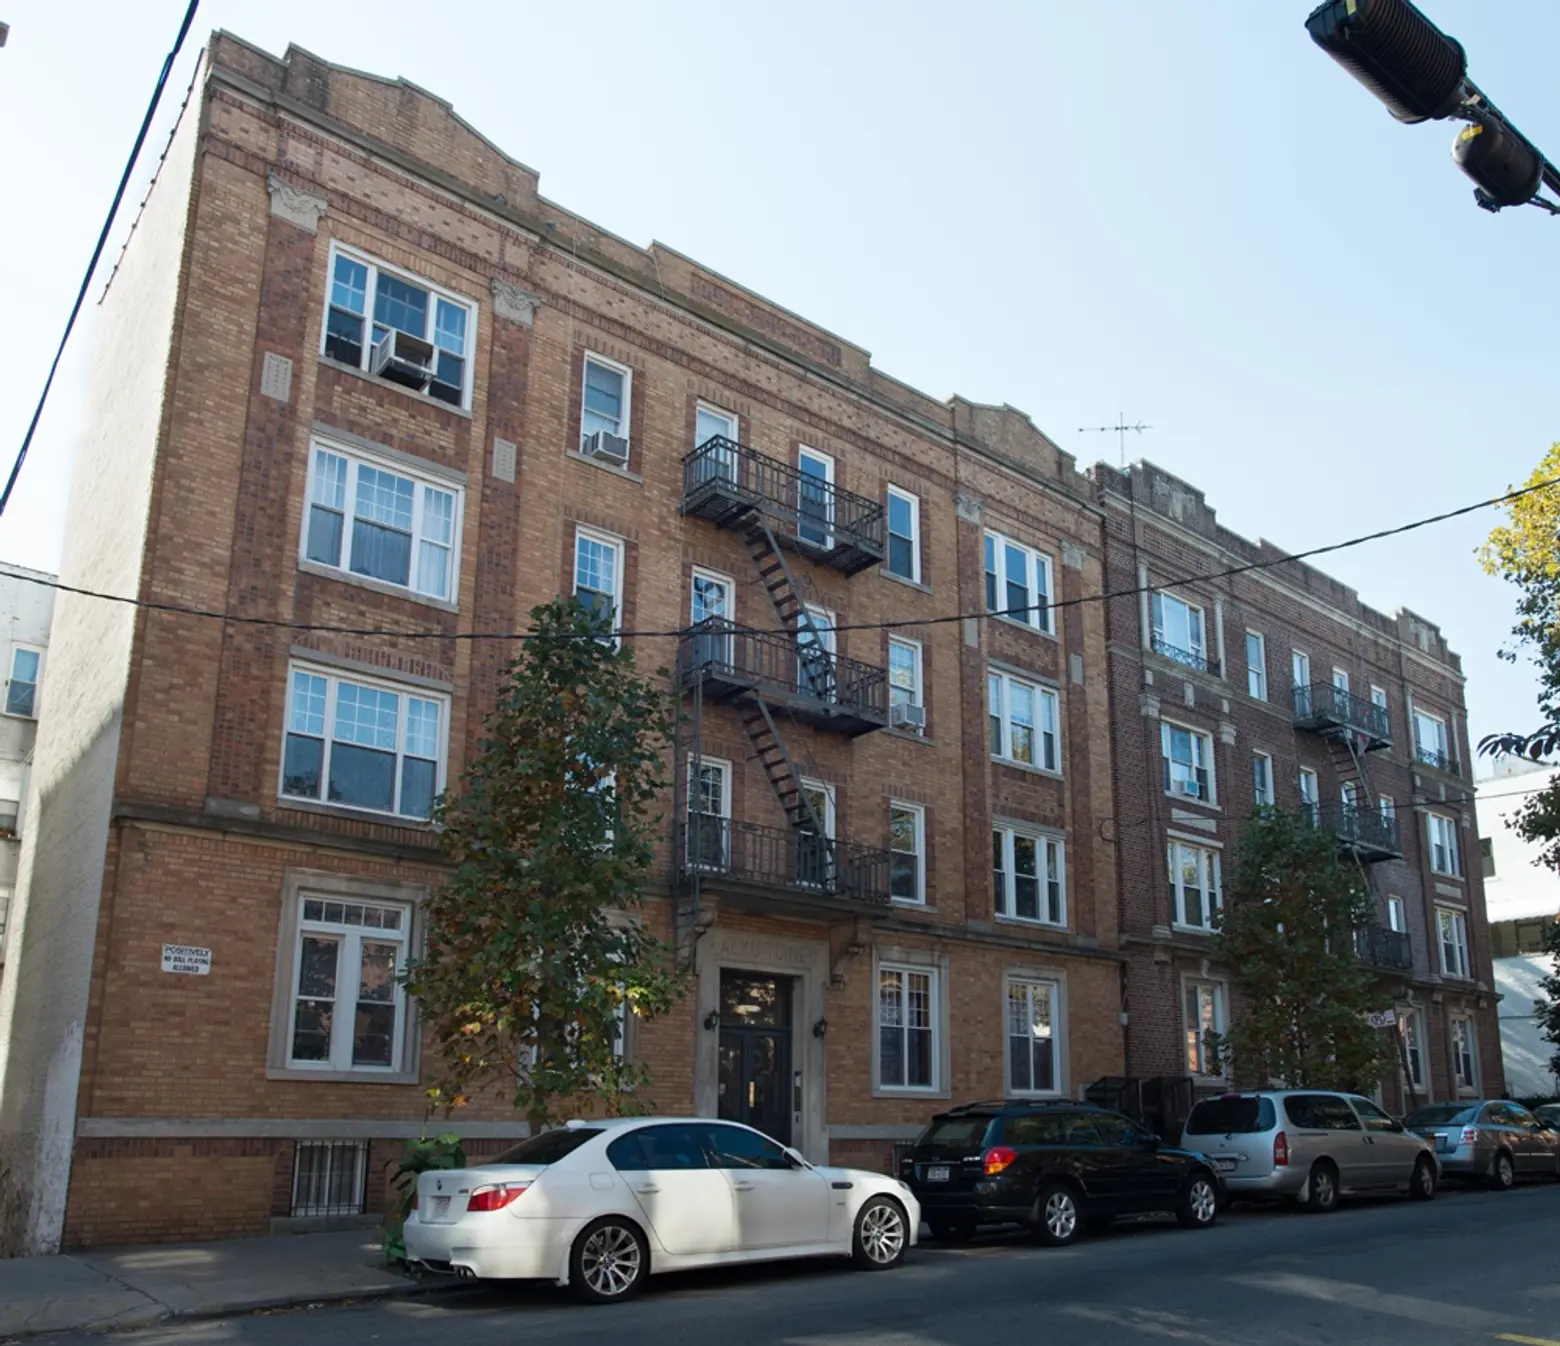 In the early 20th century, Finns in Sunset Park created NYC’s first not-for-profit co-op